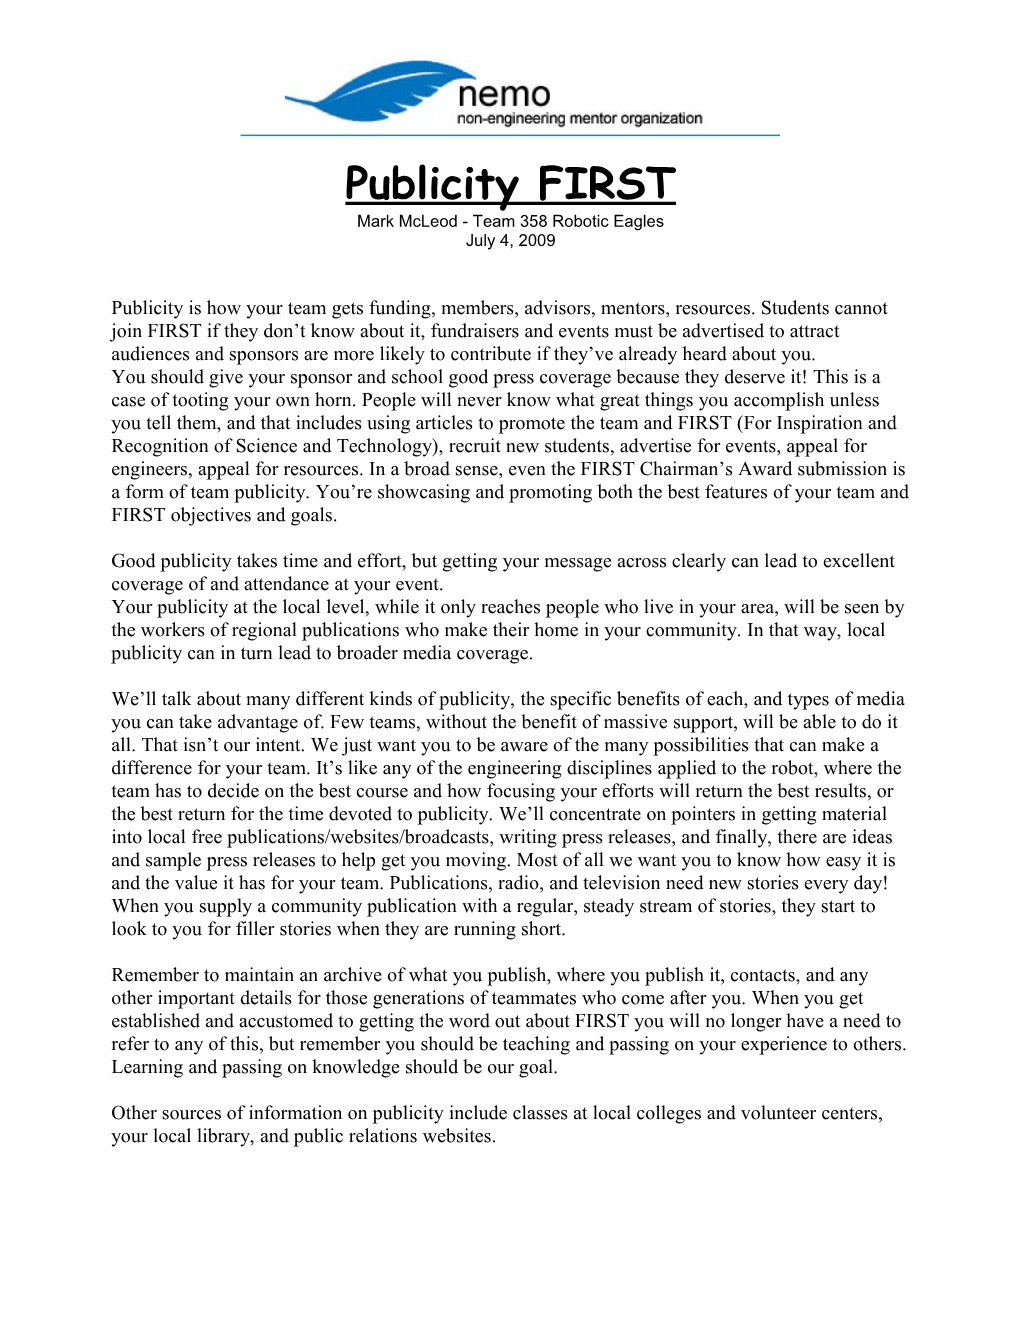 FIRST Publicity Manual